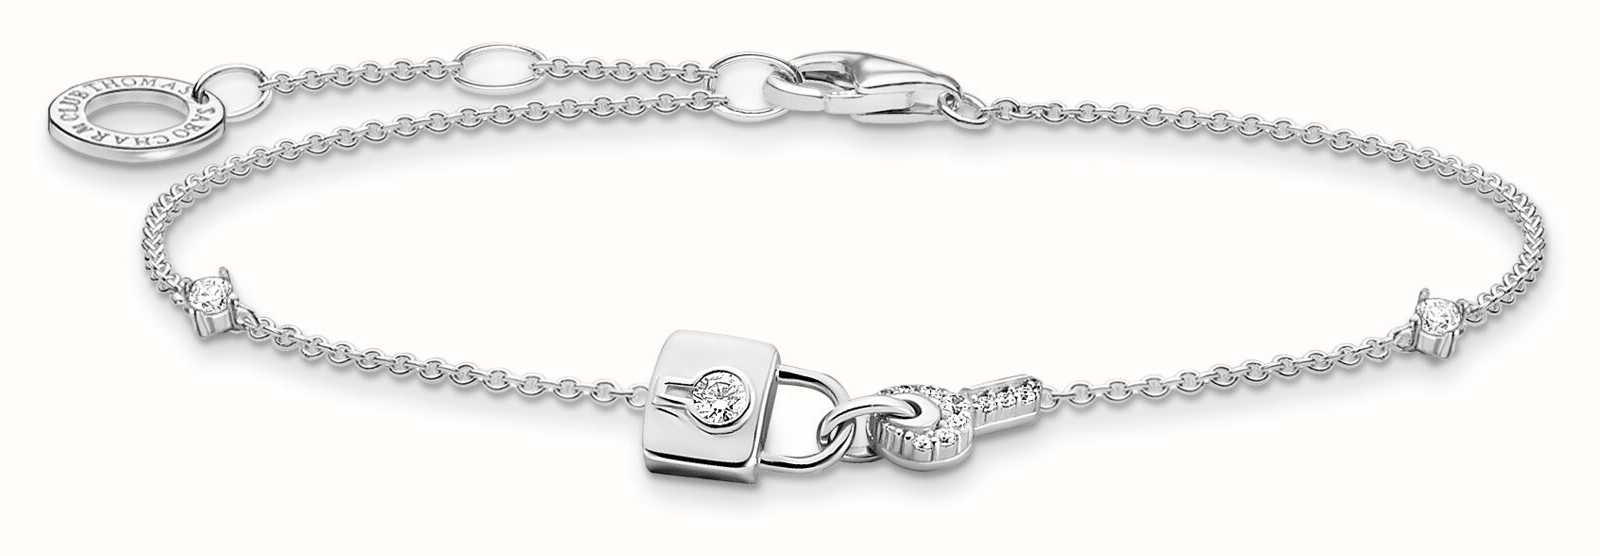 Thomas Sabo Charm Bracelet With Shimmering White Cold Enamel Sterling  X0287-007-21-L19 - First Class Watches™ USA